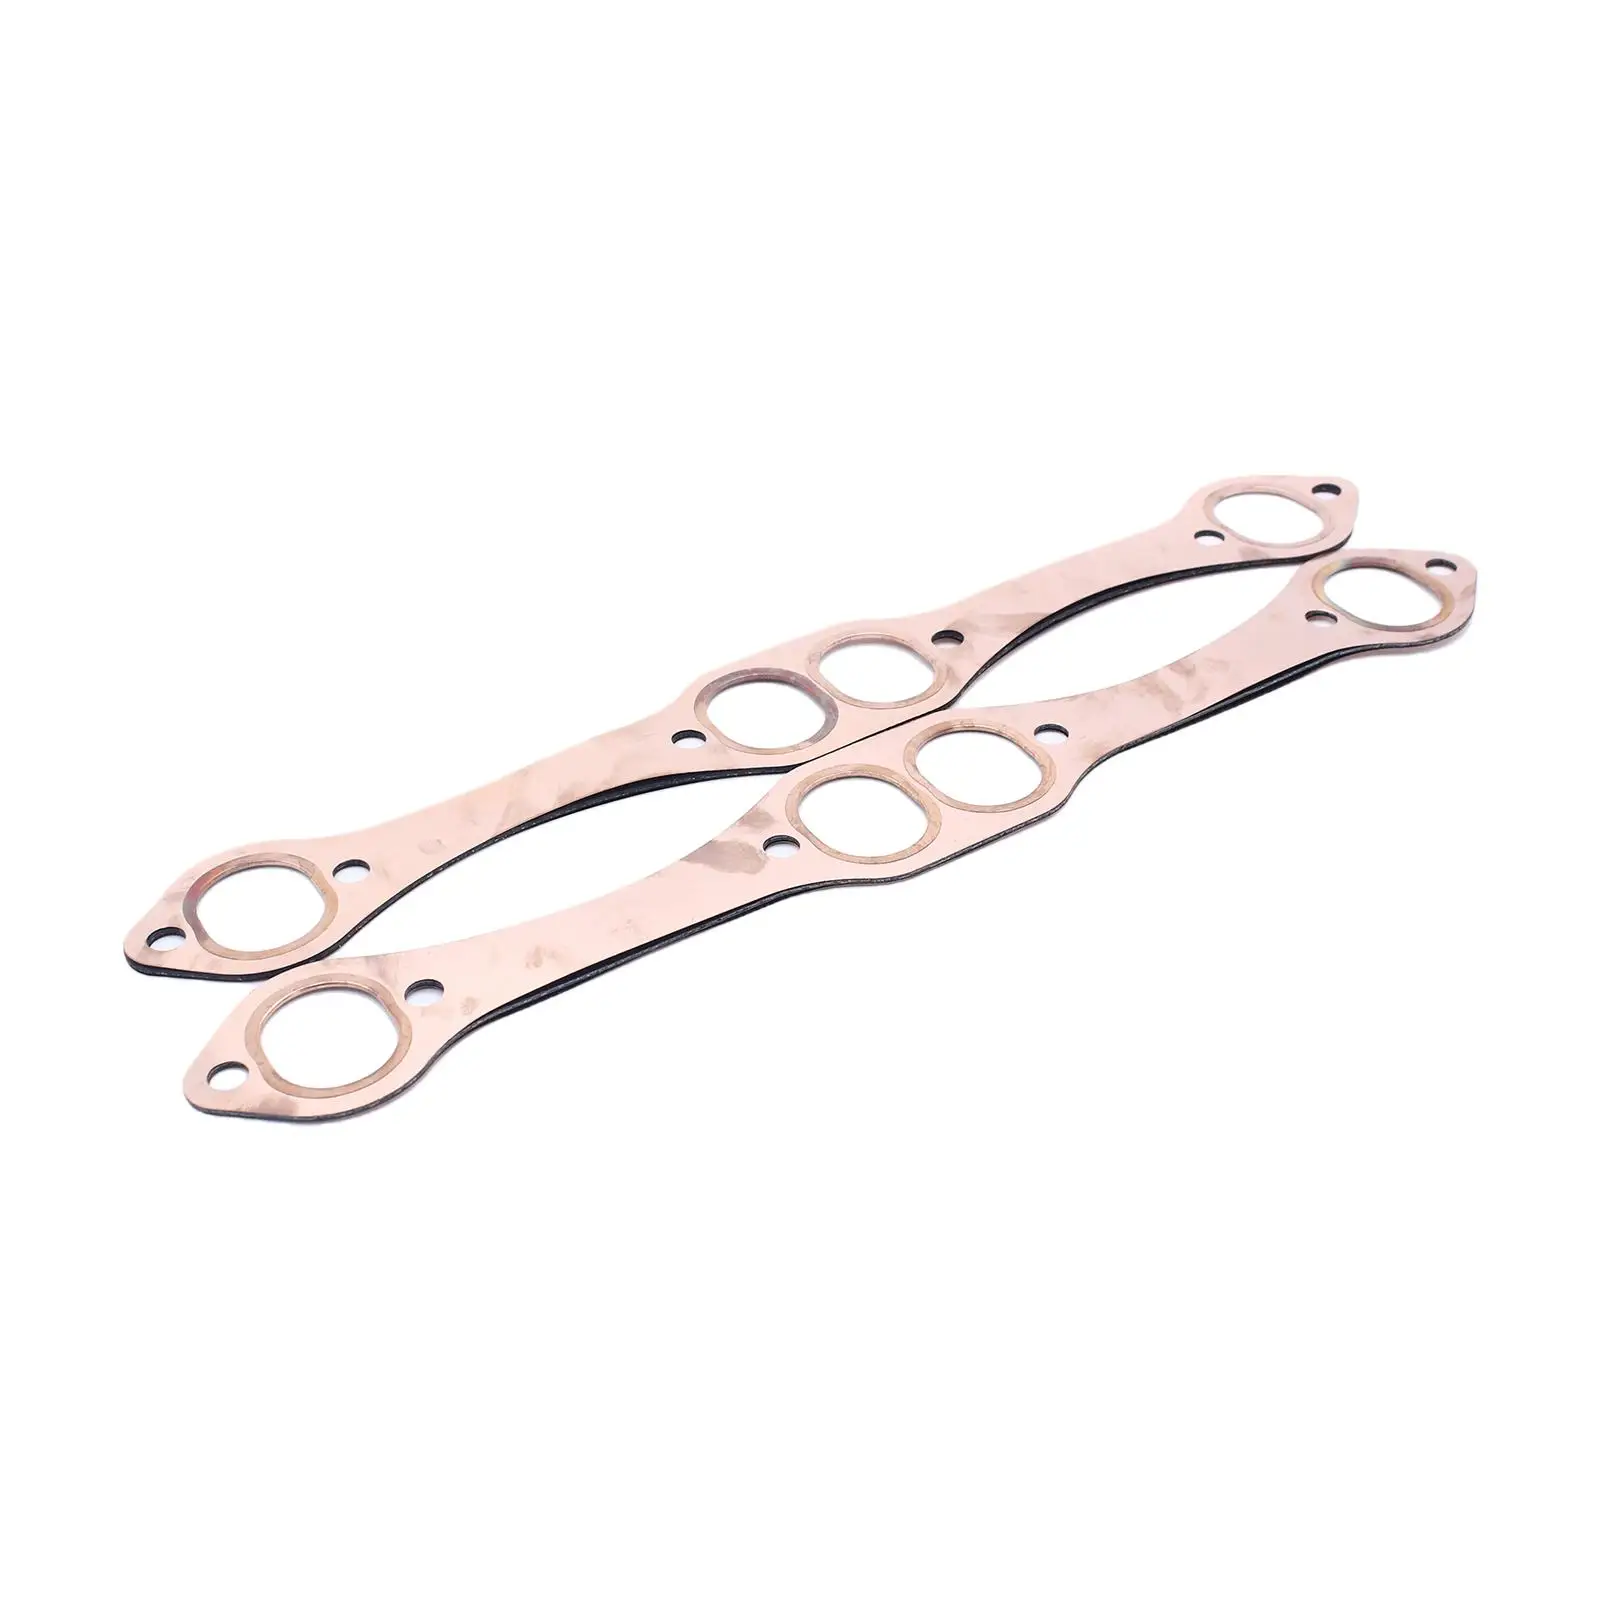 1 Pair SBC Oval Port Copper Header Exhaust Gasket Seal For Chevy SB 327 305 350 383 Exhaust Manifold Gasket Set